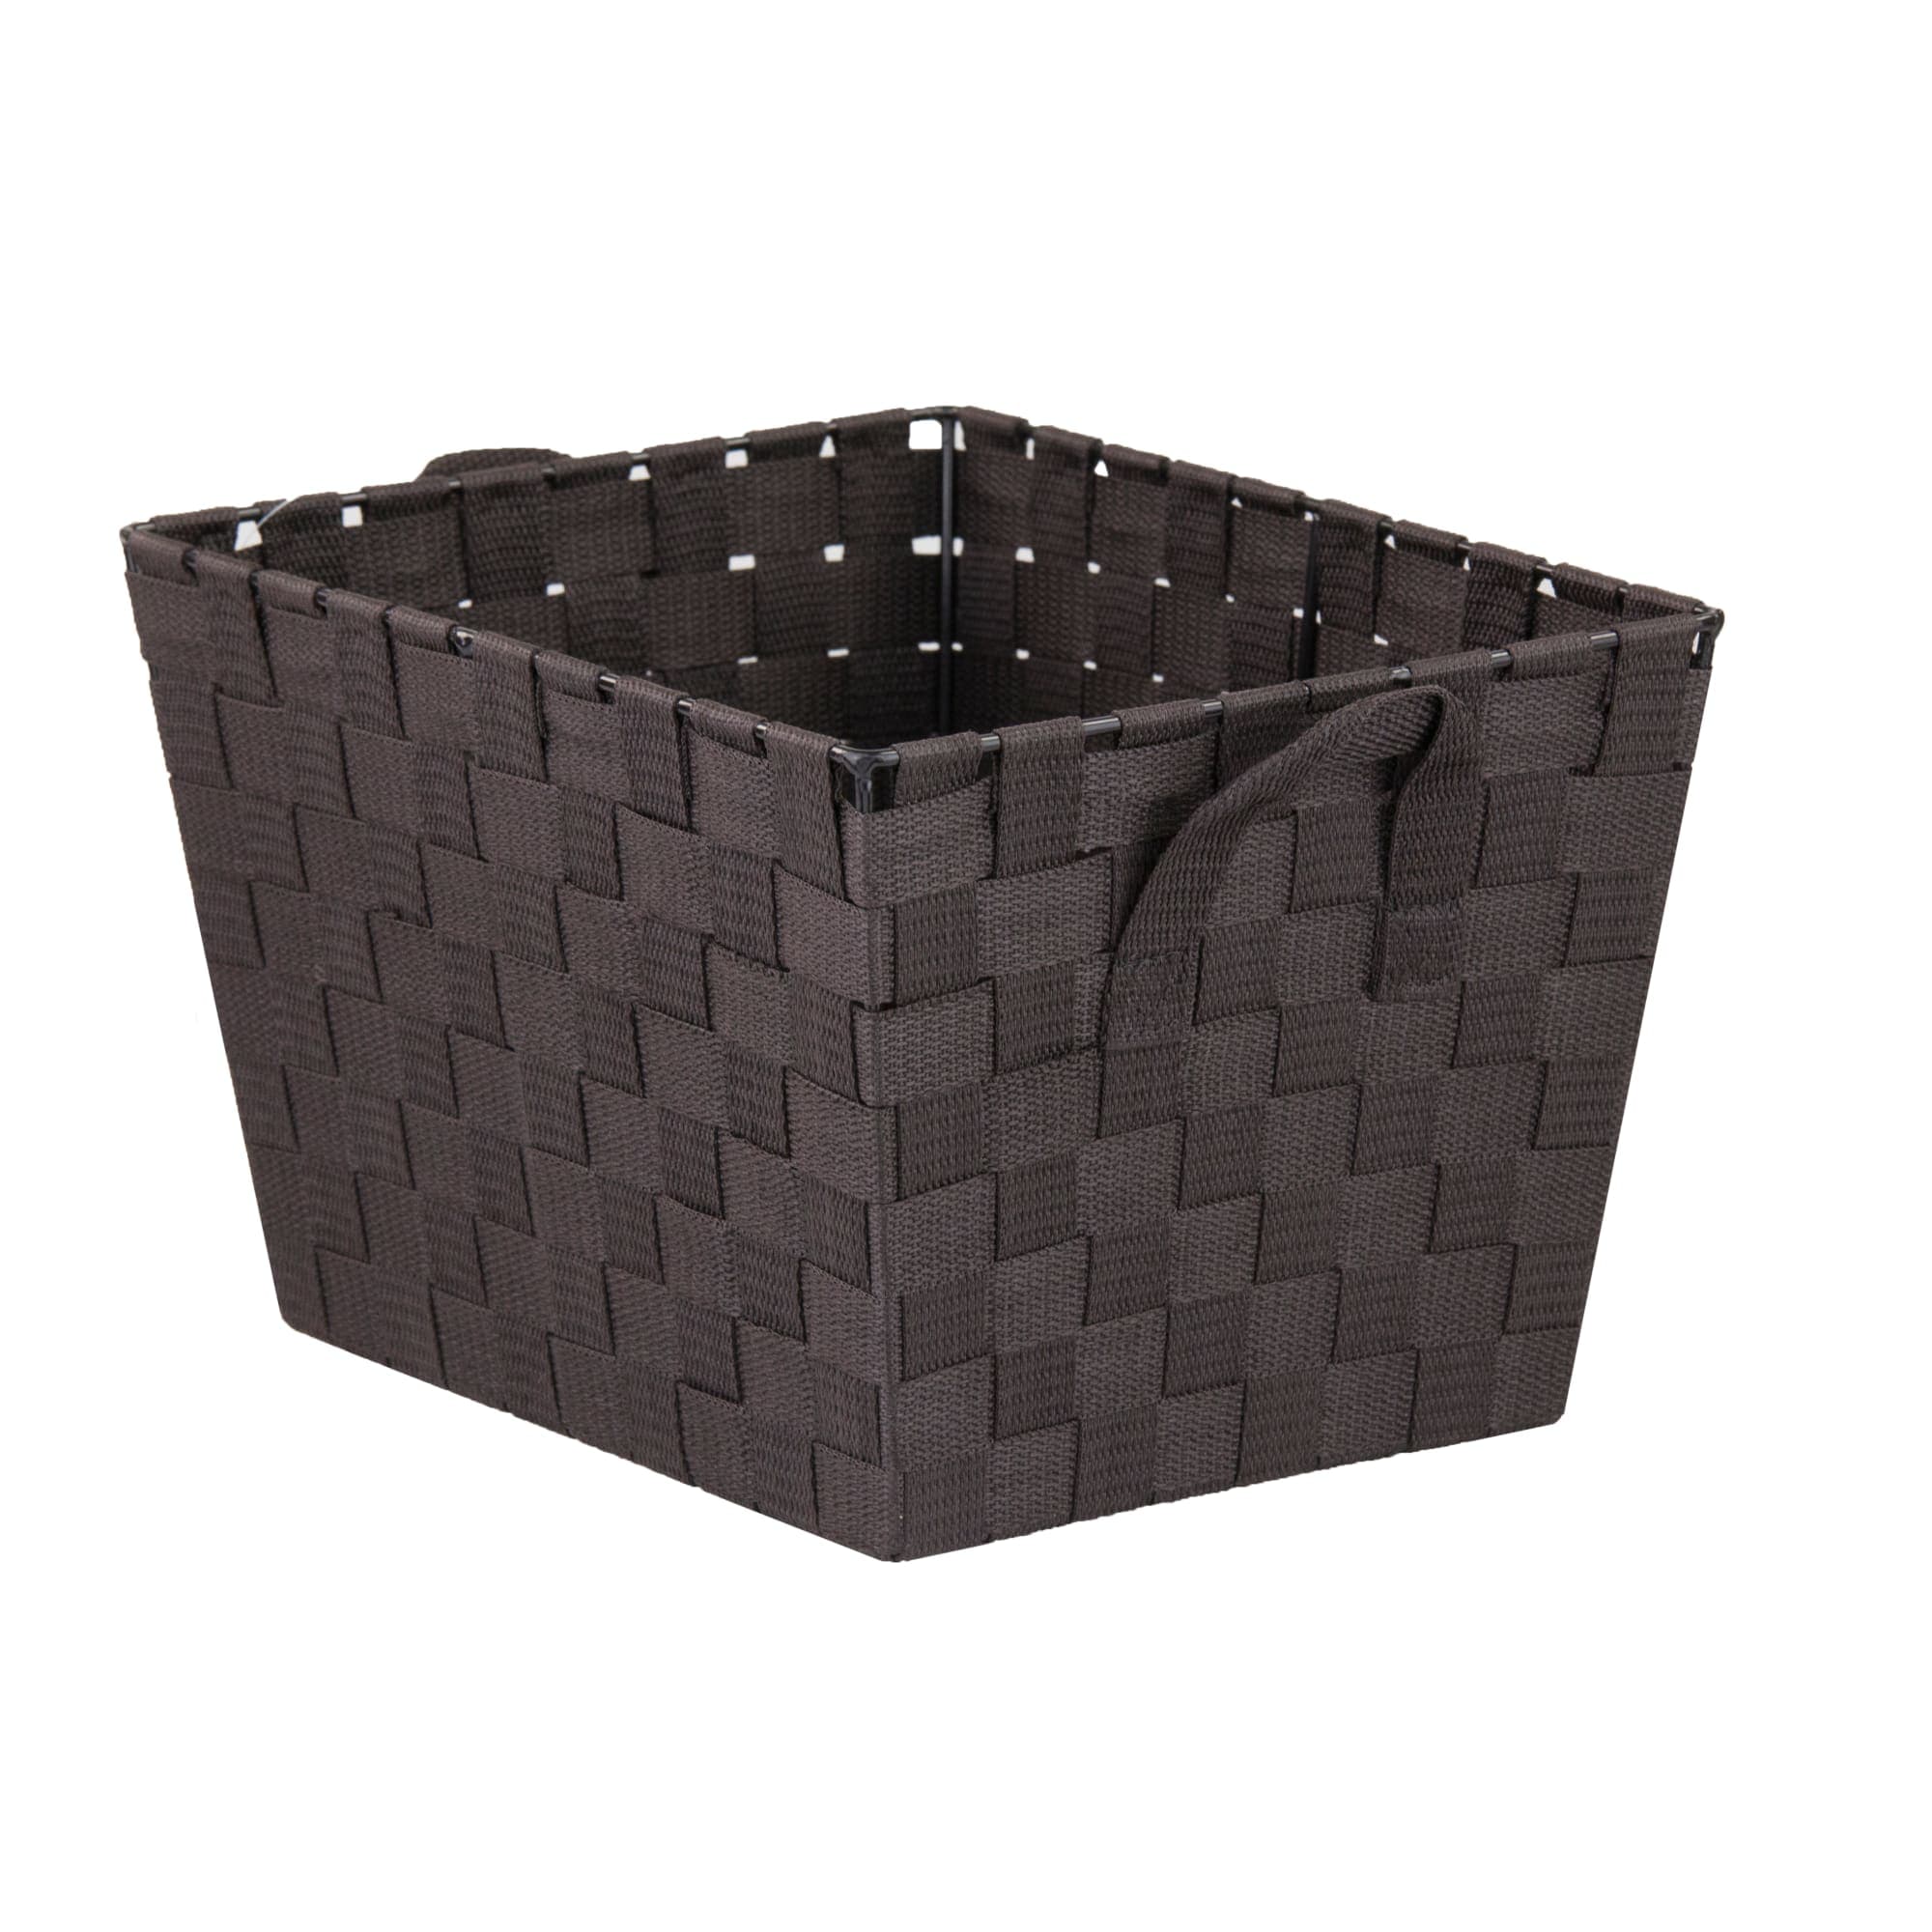 Home Basics Polyester Woven Strap Open Bin, Brown $5.00 EACH, CASE PACK OF 6